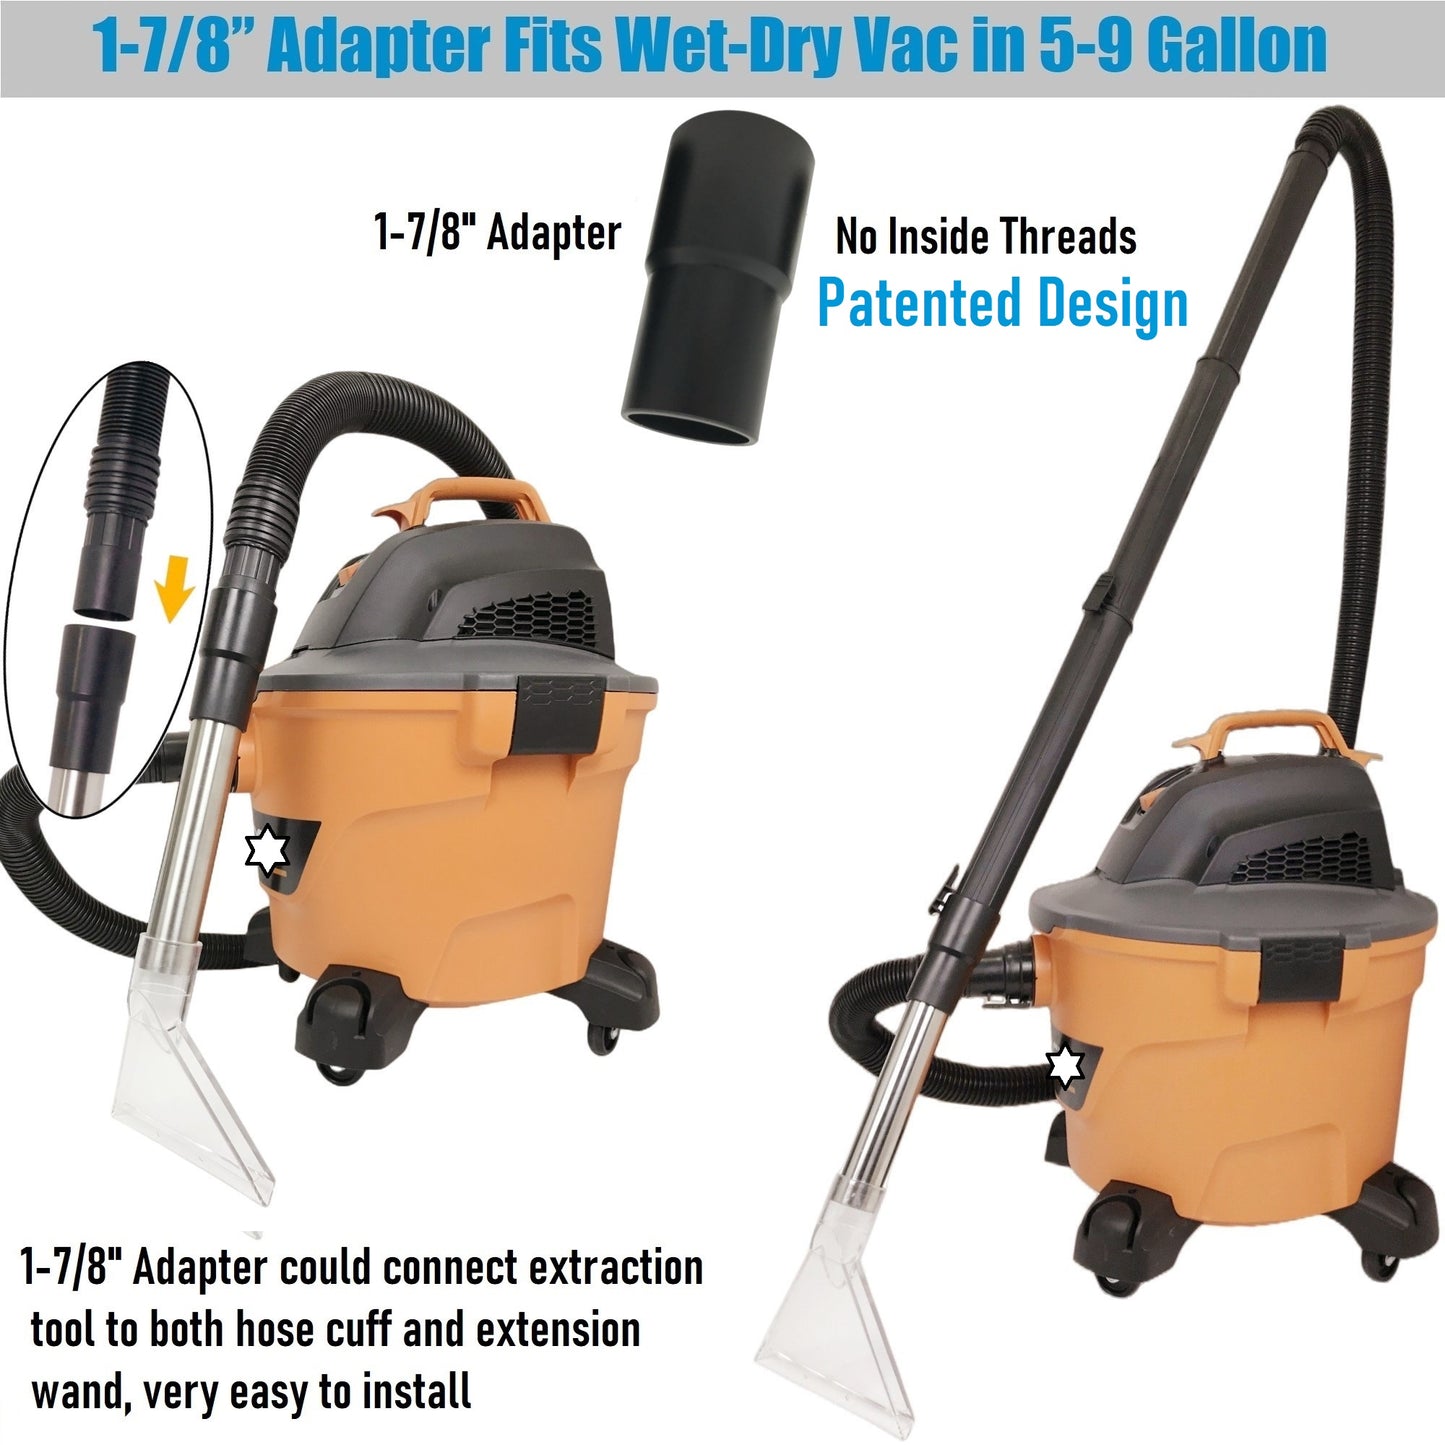 NO.4 Fits All Shop Vacs Large Extractor tool with Three Adapters 2-1/2" & 1-7/8" &1-1/4" and with 7-1/2" Clear Head for Upholstery & Carpet Cleaning and Auto Detailing